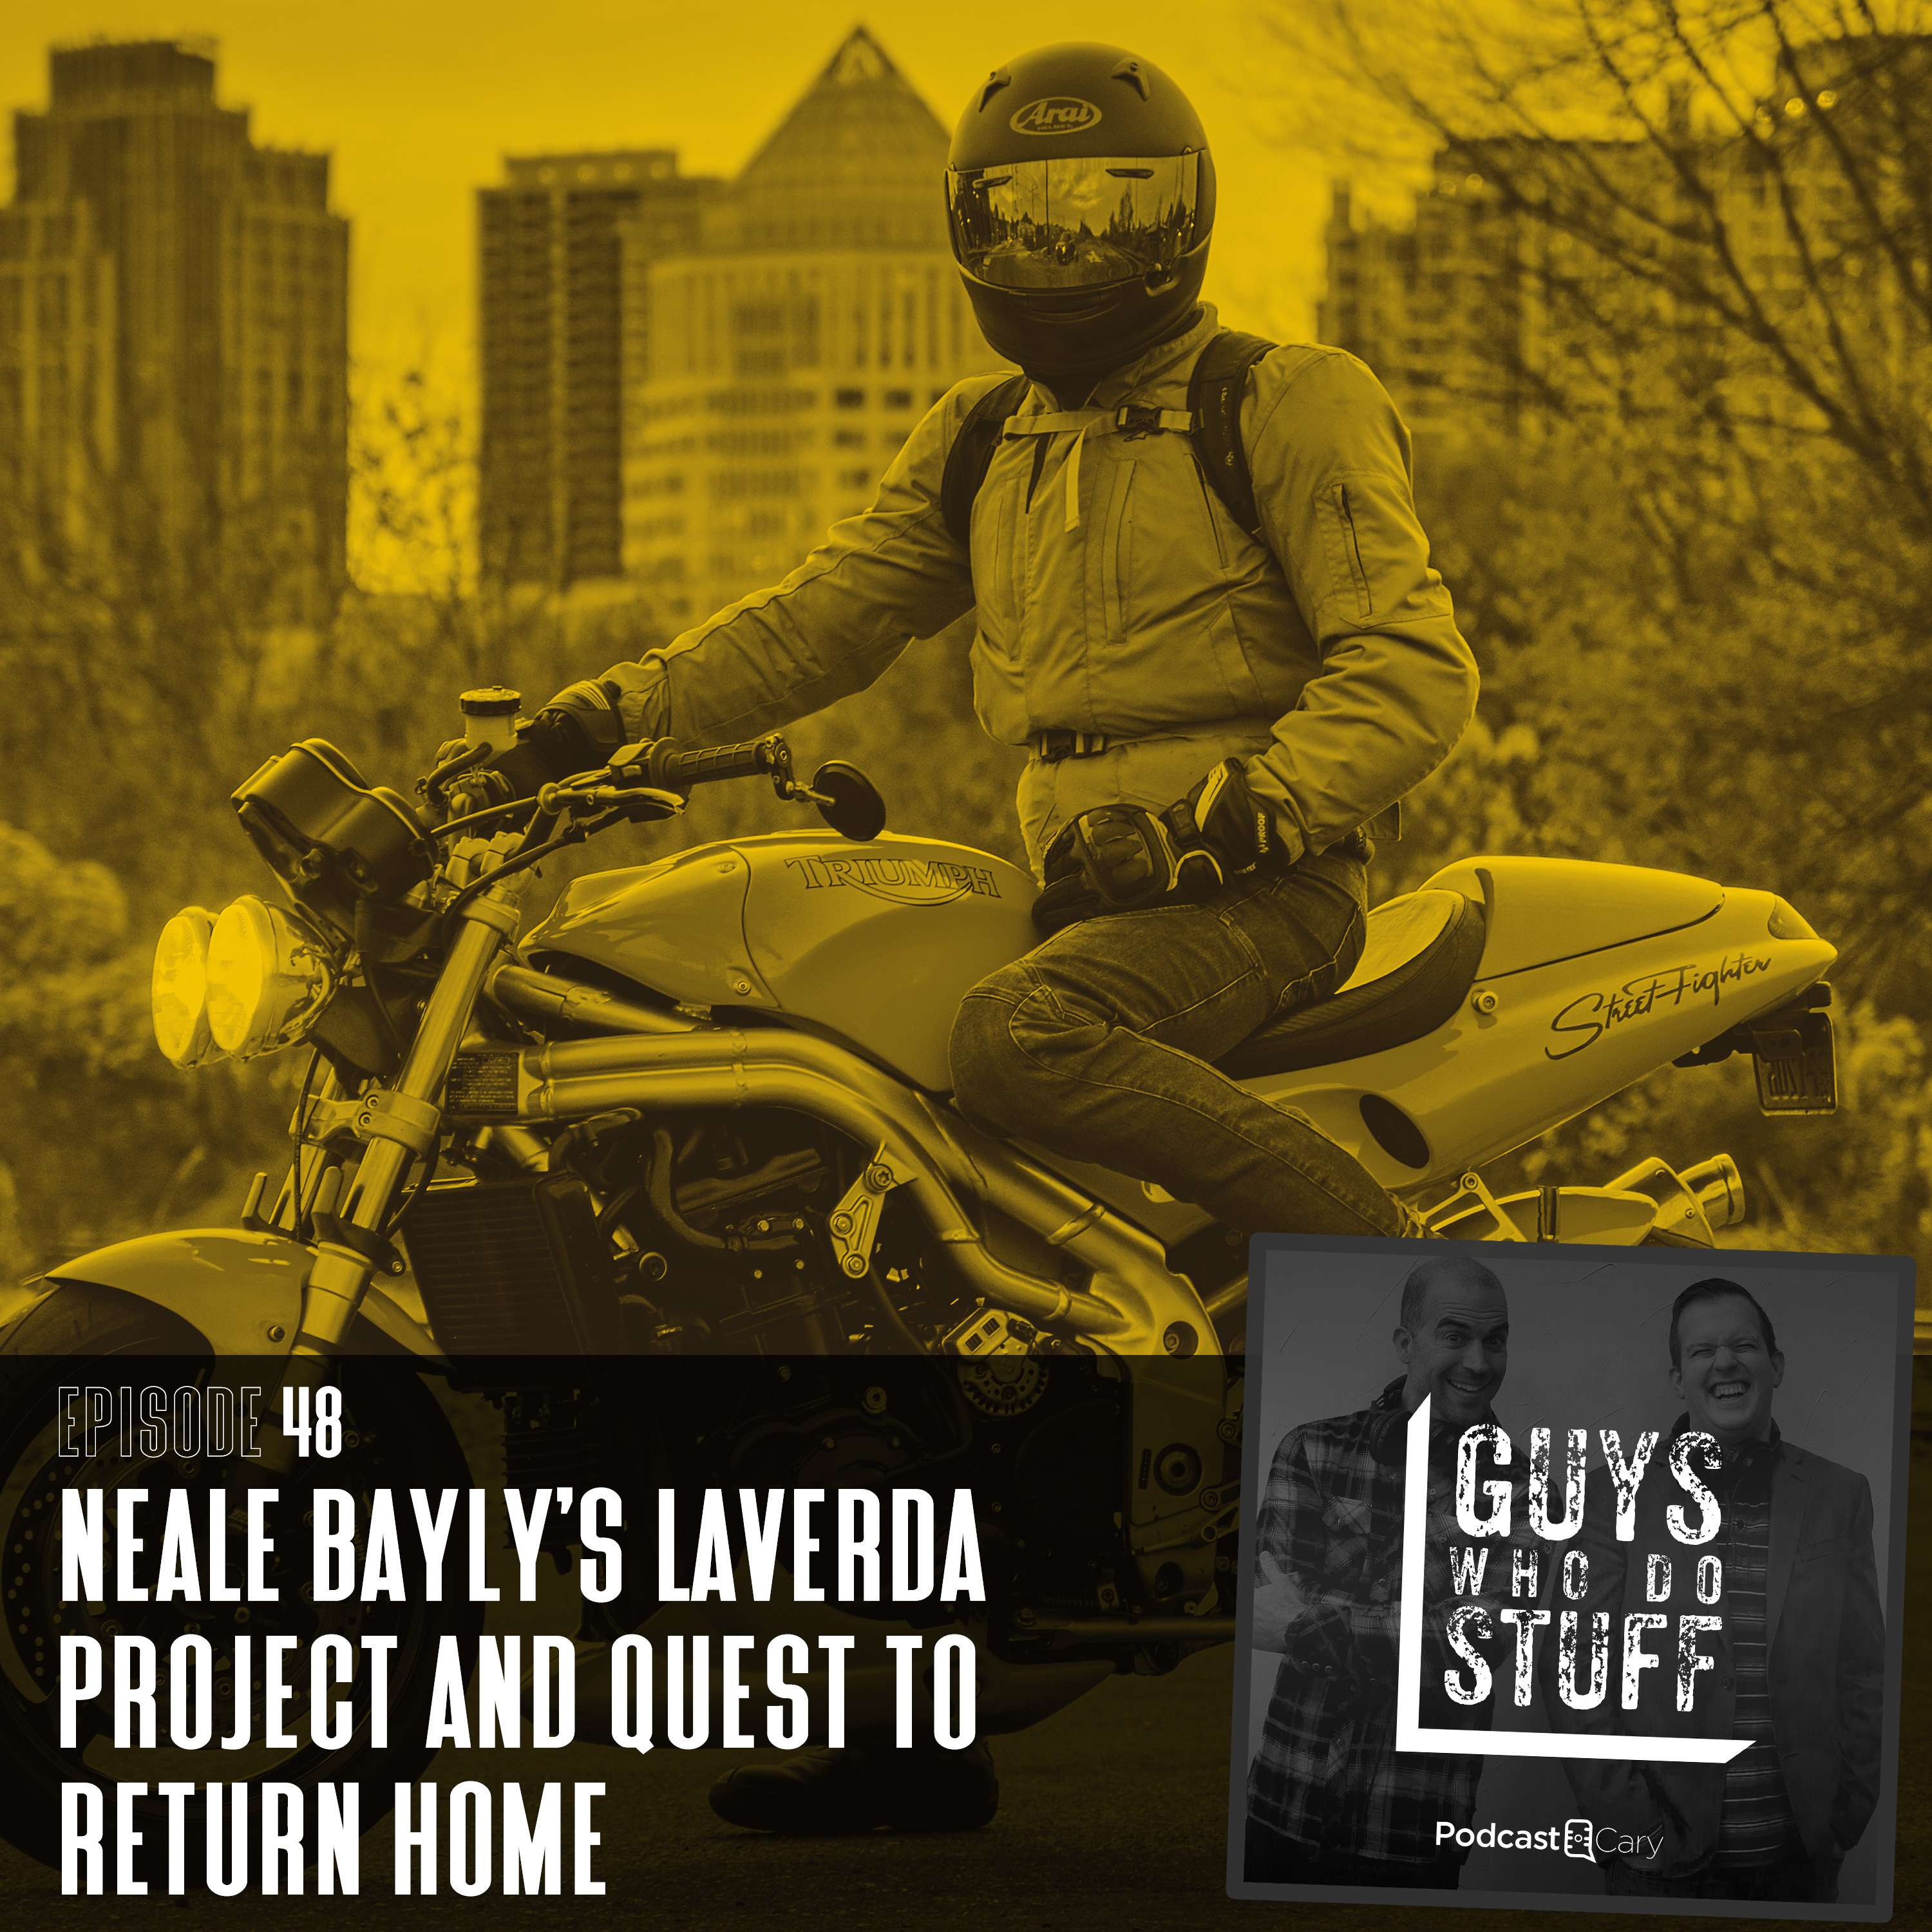 Neale Bayly’s Laverda Project and quest to return home